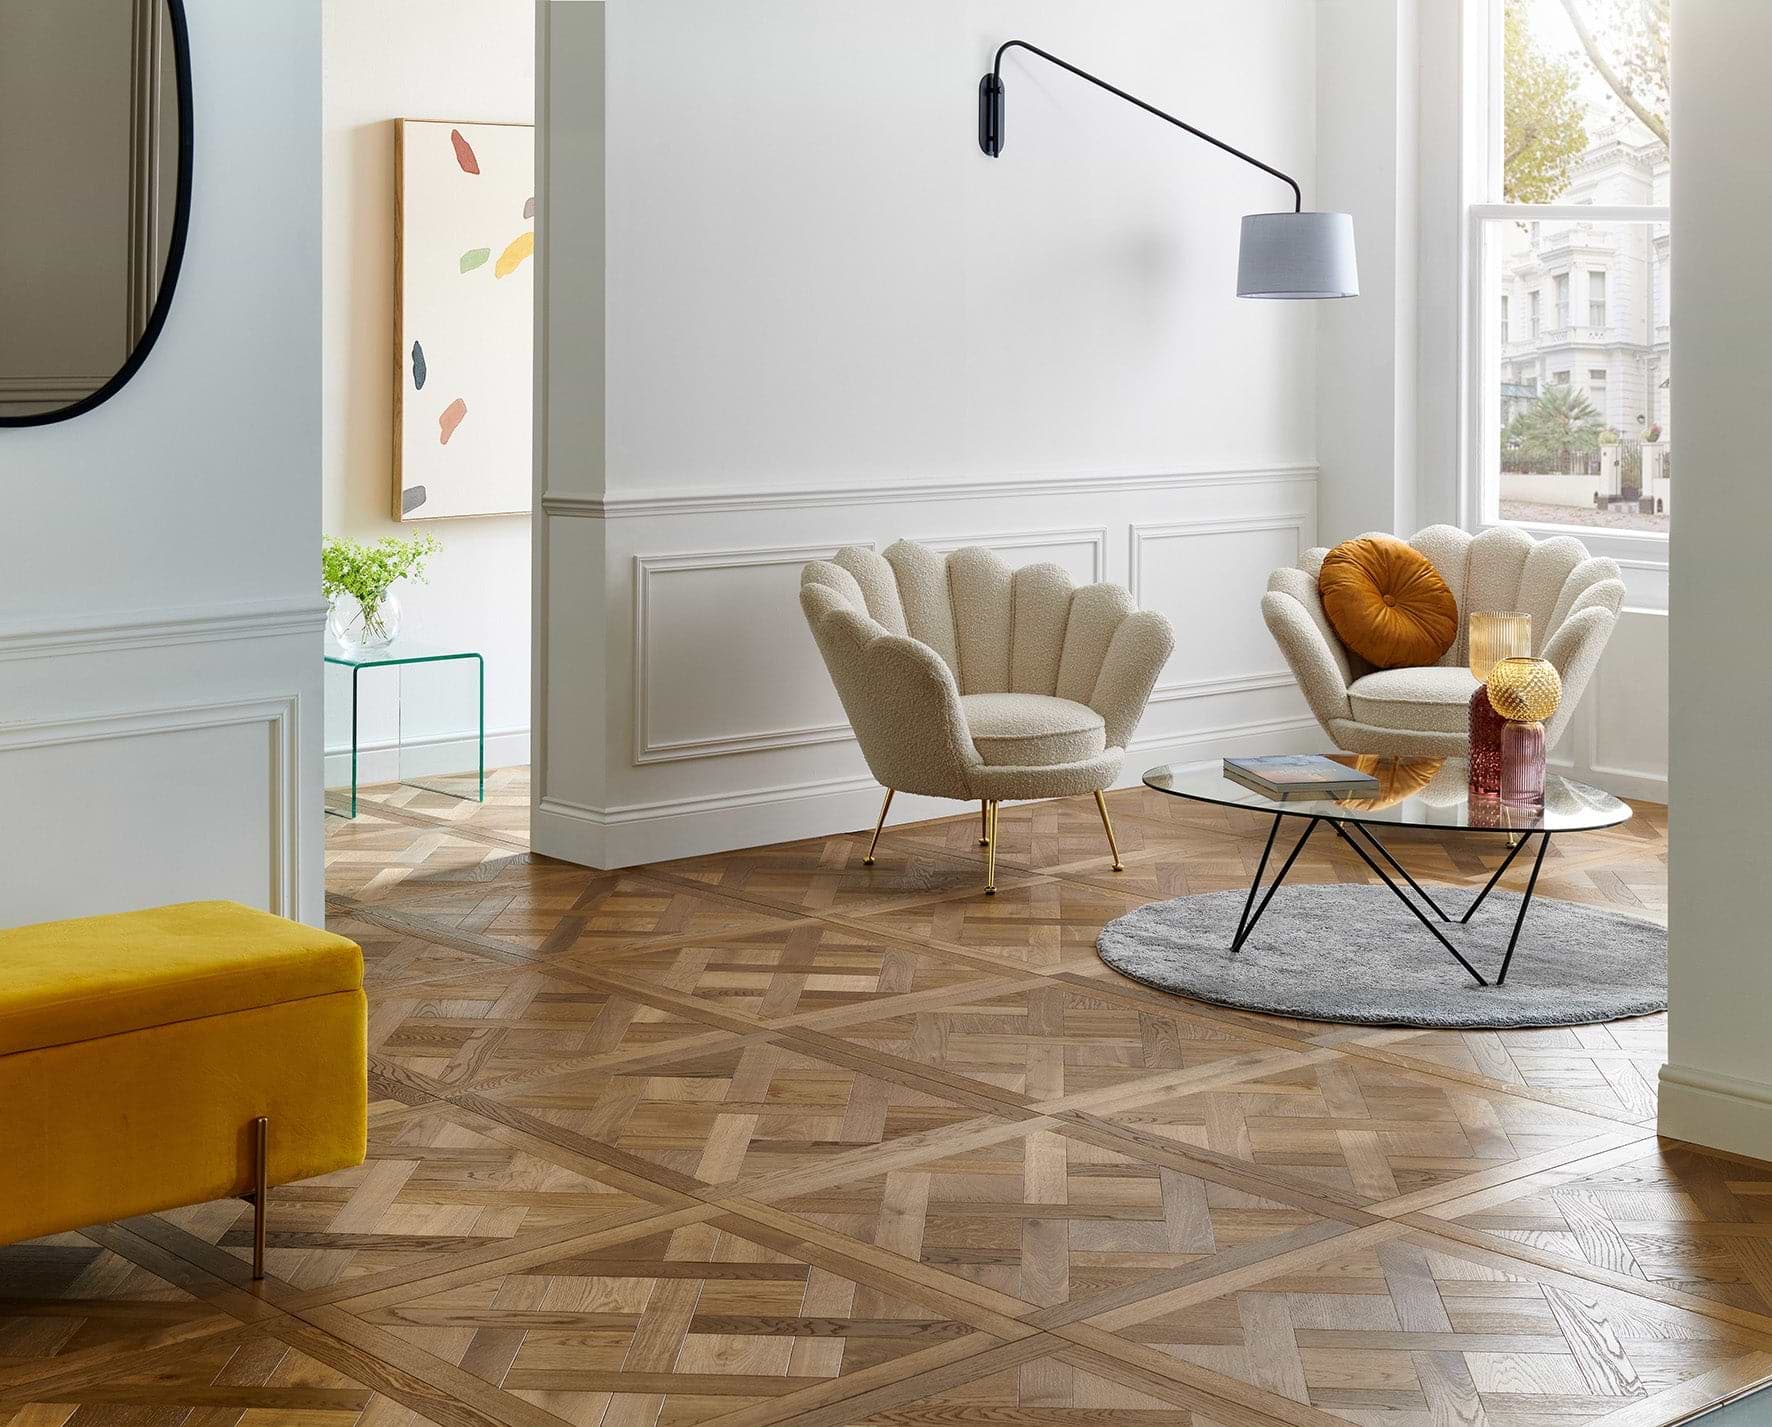 How to pick the best parquet flooring - Hyperion Tiles